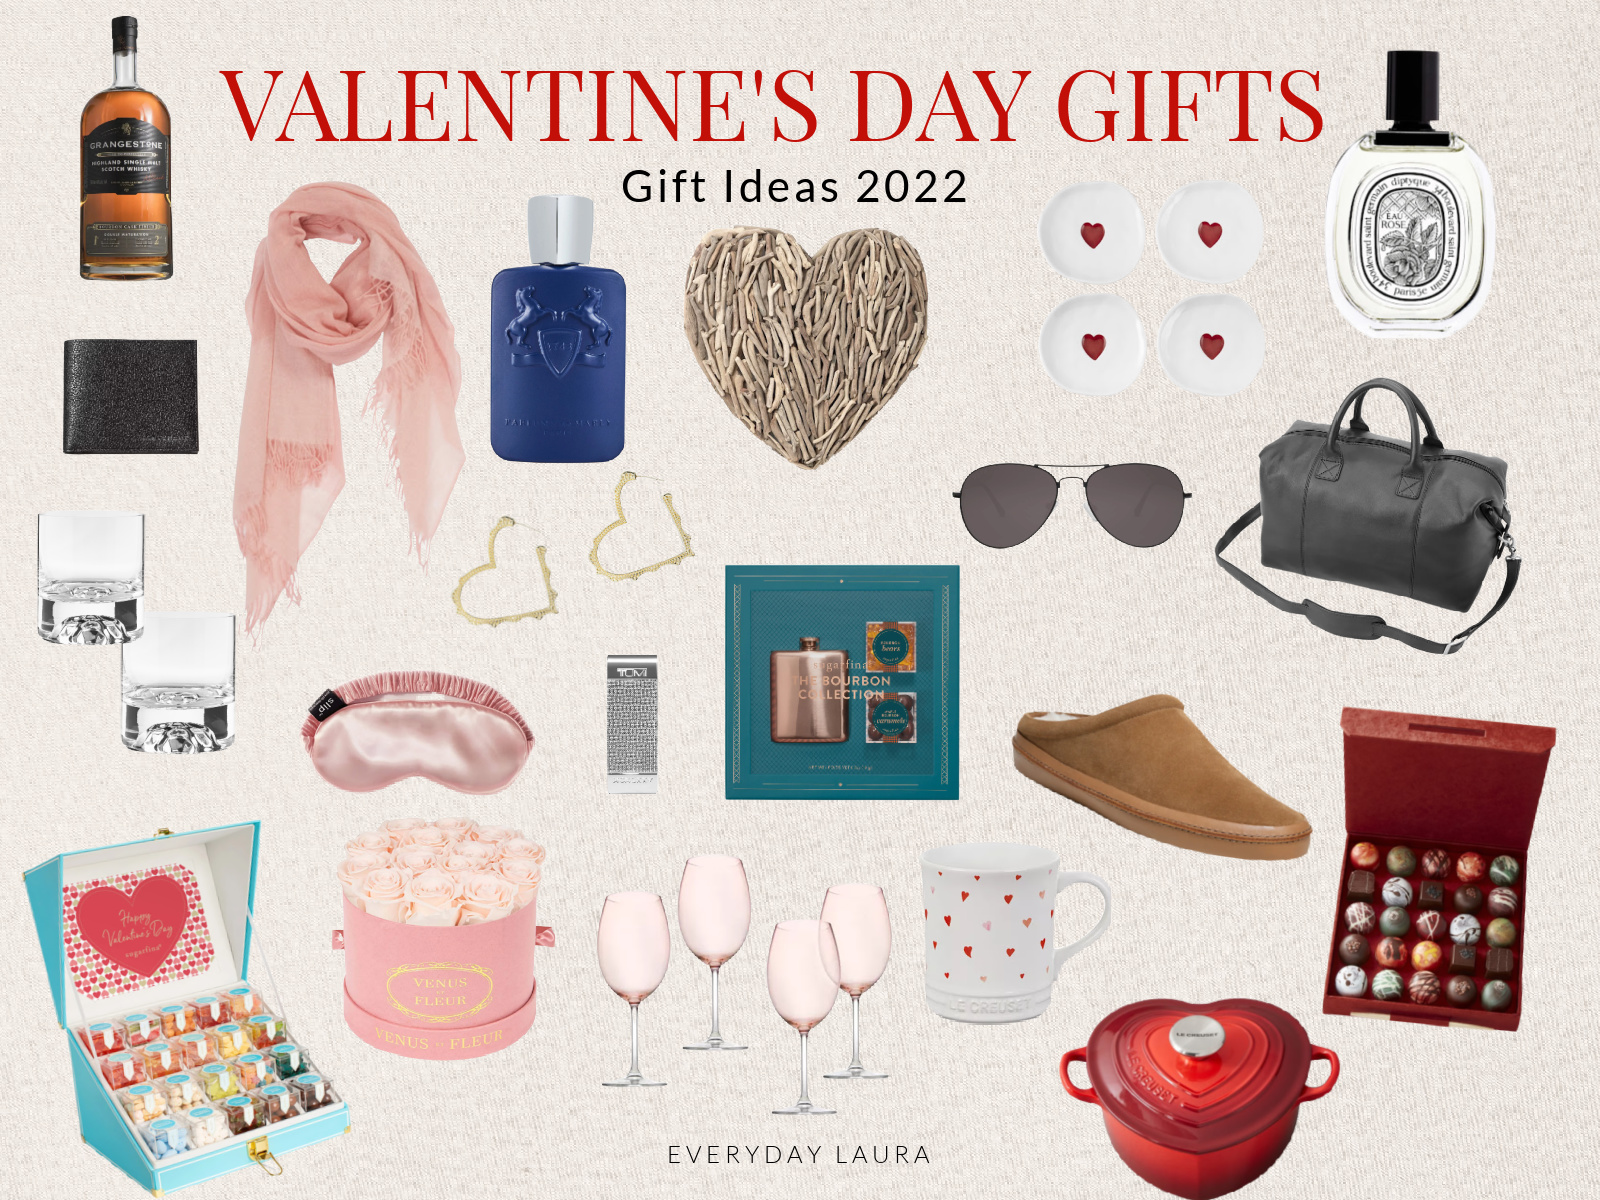 2022 VALENTINE'S DAY GIFT GUIDE